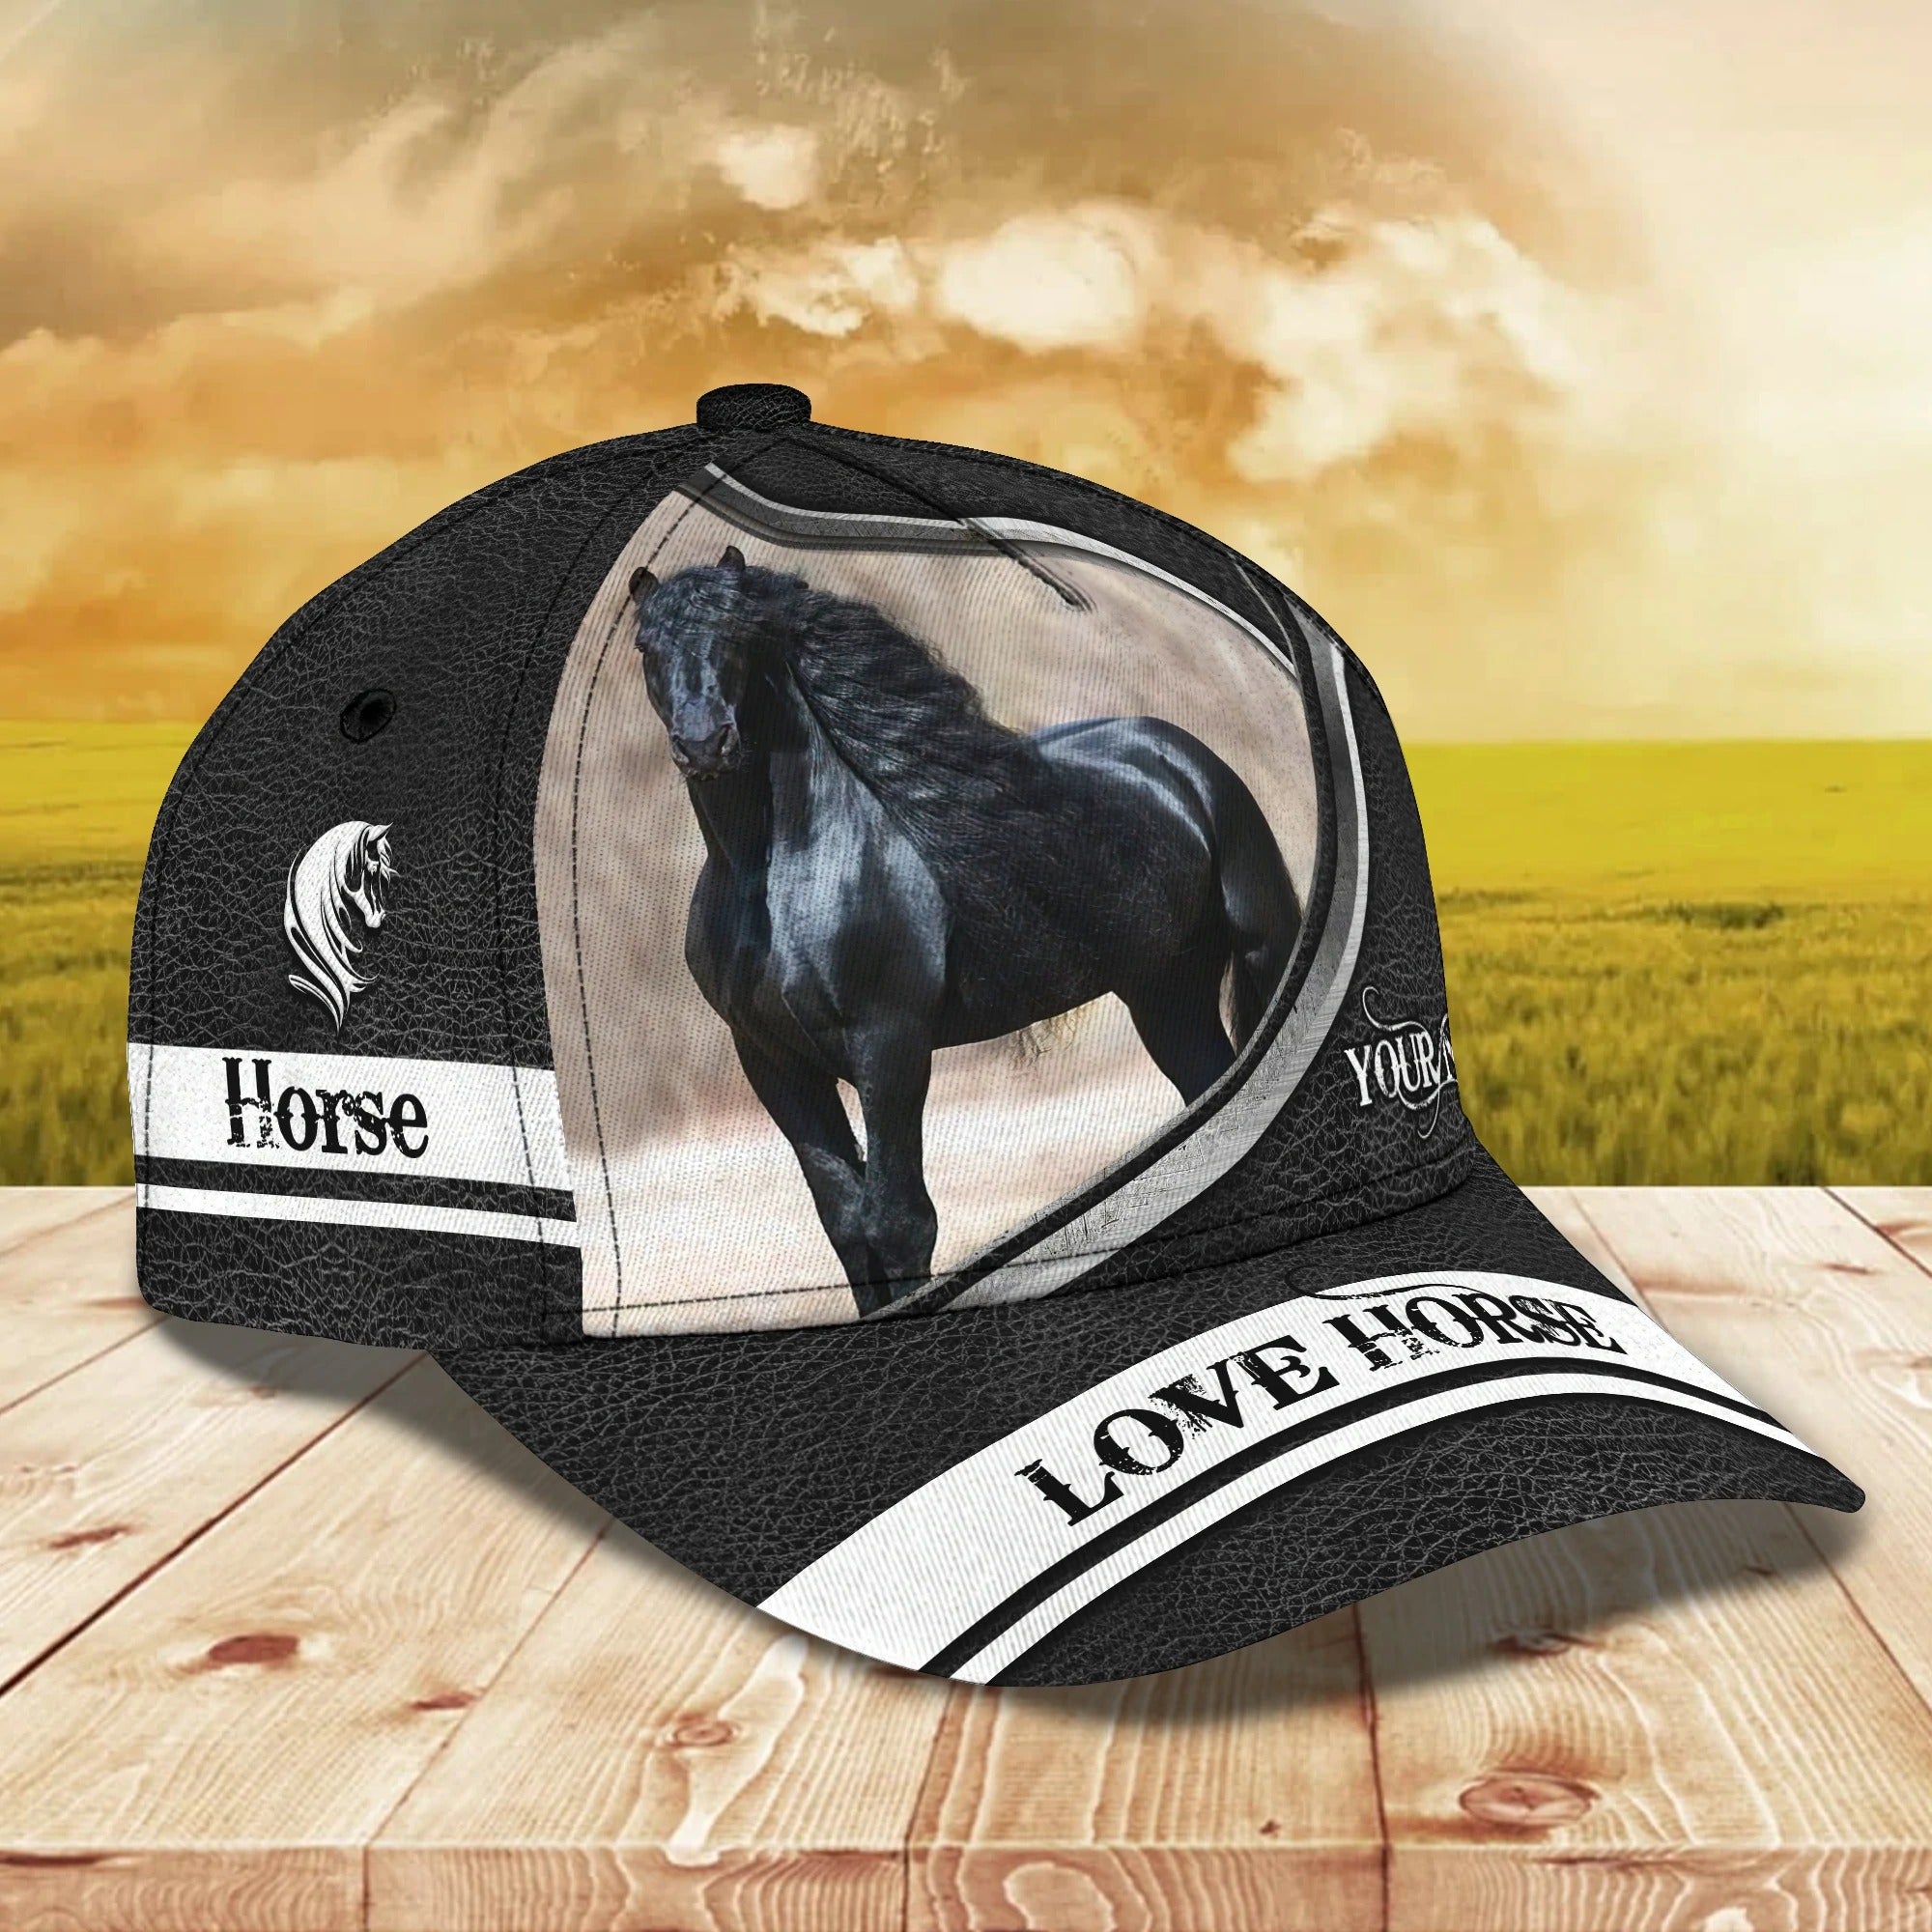 Custom With Name Baseball Full Print Horse Cap For Men And Woman/ Horse Woman Cap Hat/ Horse Lover Gift